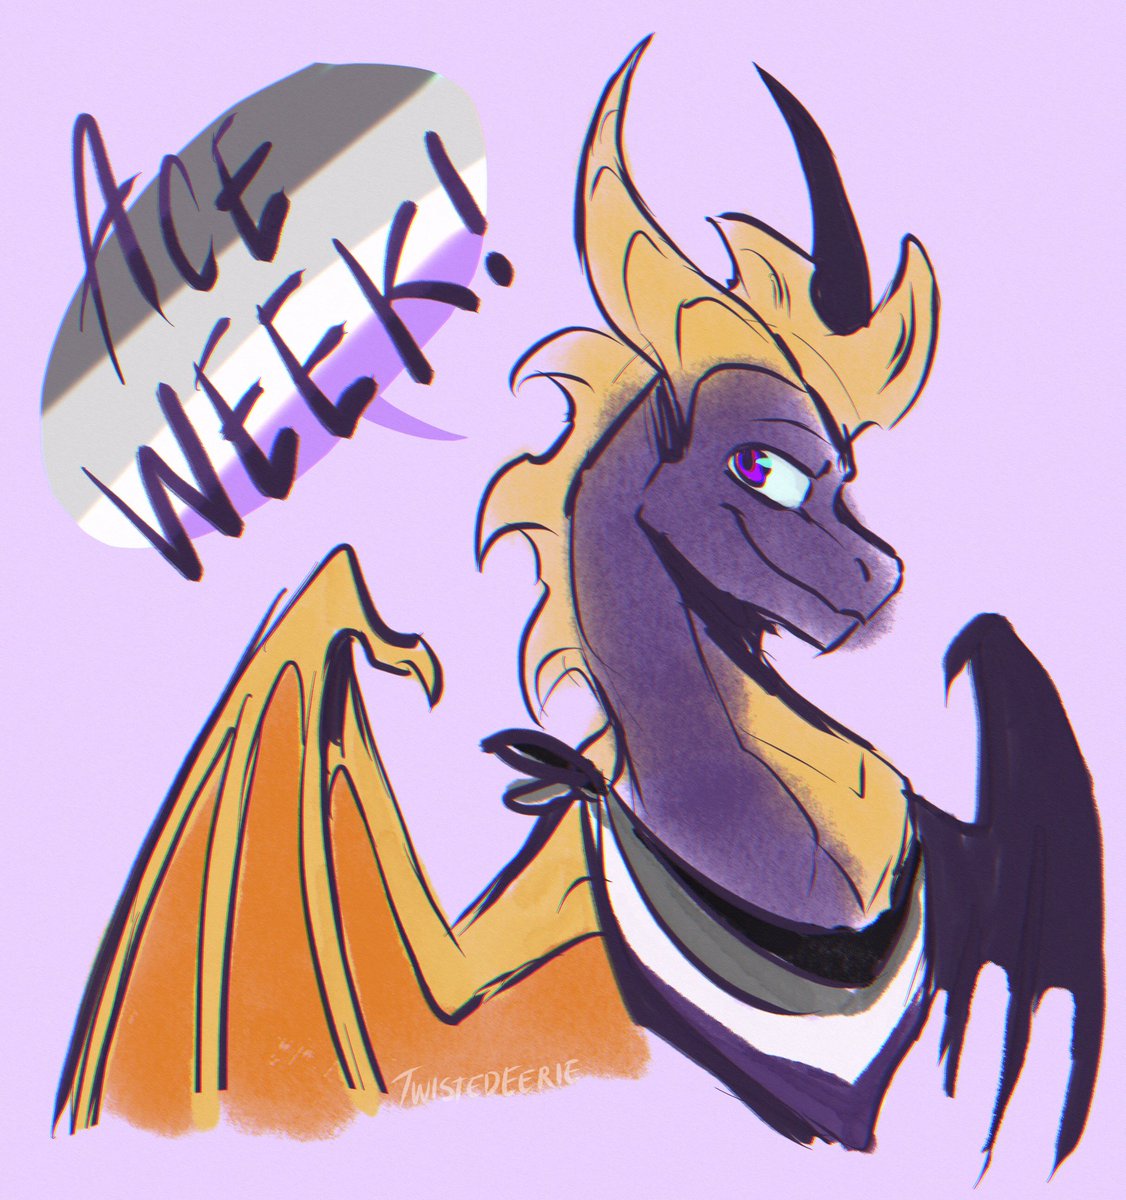 Been so busy this week I haven’t had the time to draw anything for #AceAwarenessWeek #AceWeek so here’s a quick Spyro (who is absolutely Ace) cos Spyros been on the mind lately